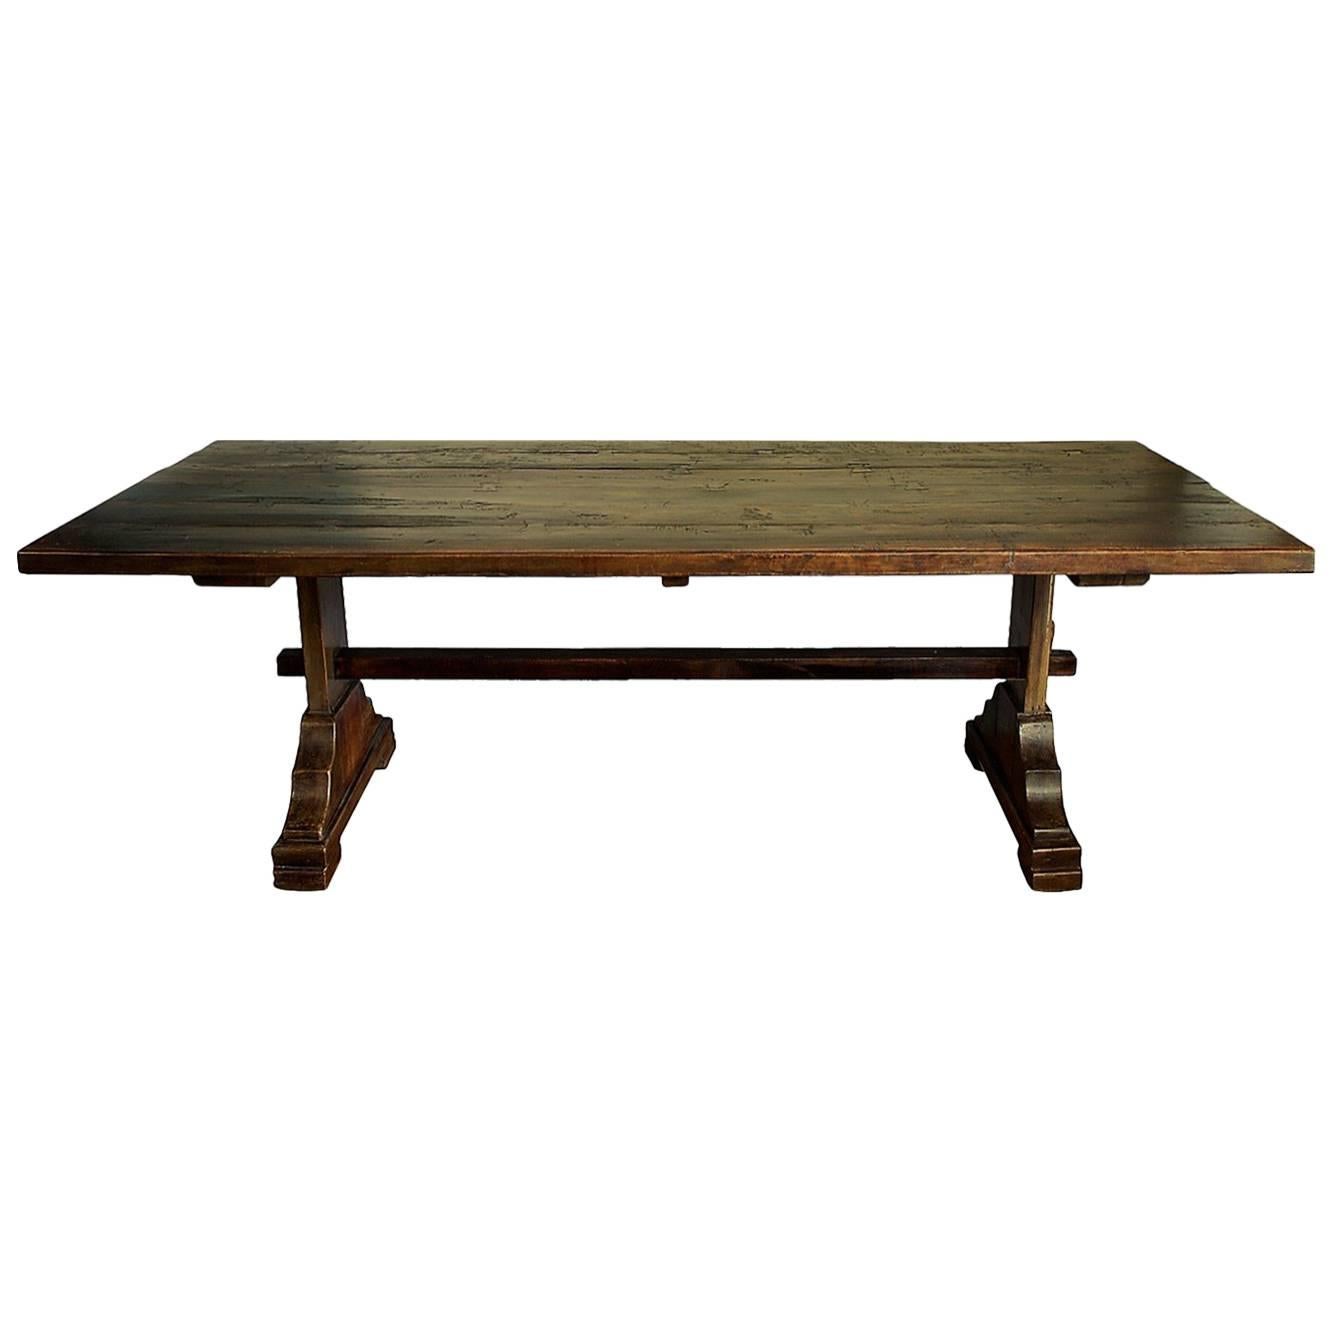 Trestle Dining Table Teakwood Rustic Antique Style